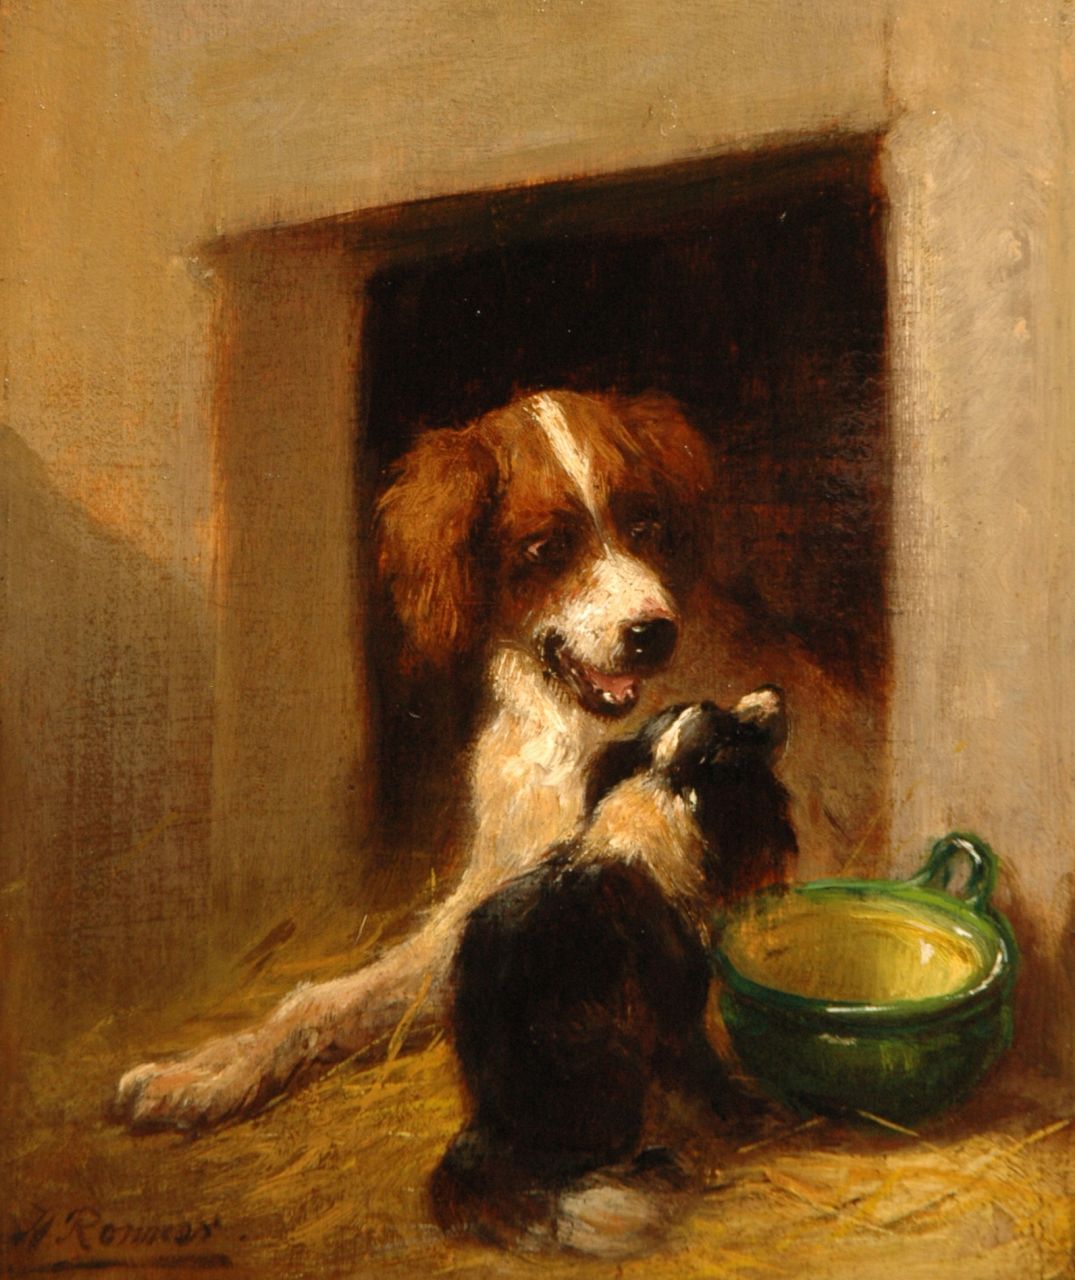 Ronner-Knip H.  | Henriette Ronner-Knip, The visitor, oil on panel 17.4 x 14.7 cm, signed l.l.